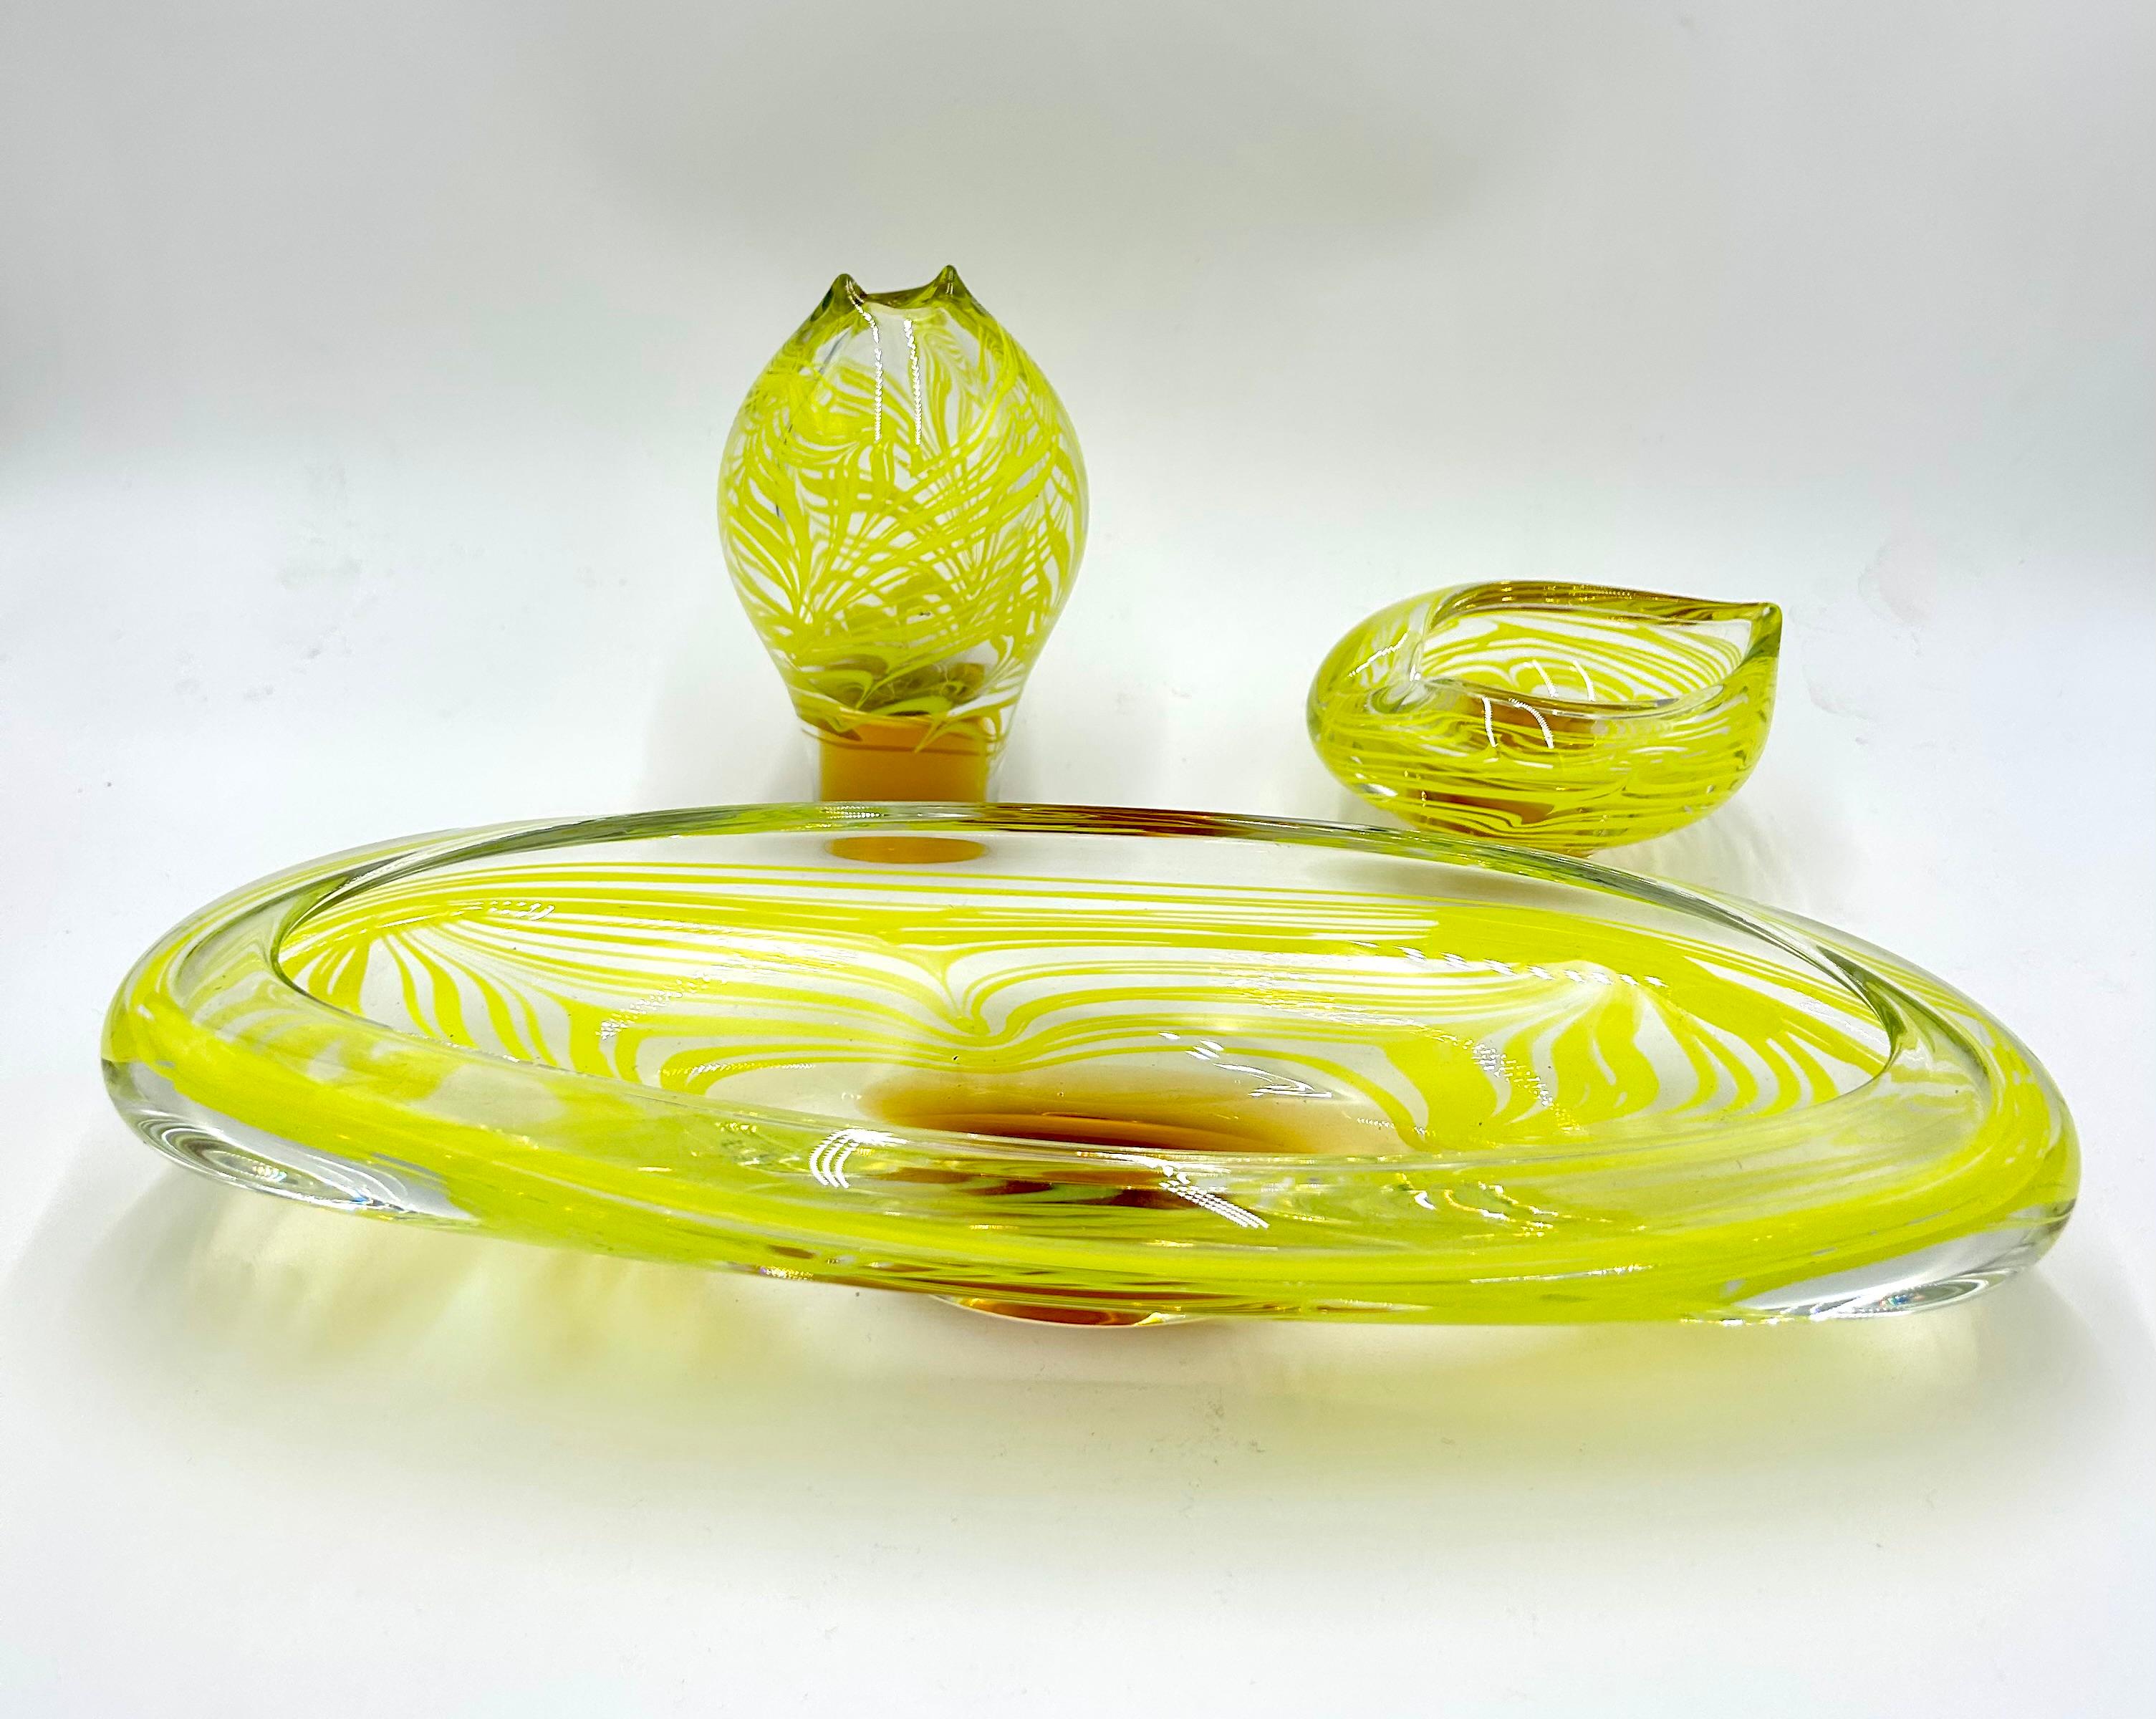 Unique. A rare set of art glass consisting of a vase, ashtray and a platter designed by Ivo Rozsypal for Crystalex.

Glass made in the Czech Republic in the 1960s.

Very good condition, no damage.

vase: height 18cm, diameter 10cm

ashtray: height